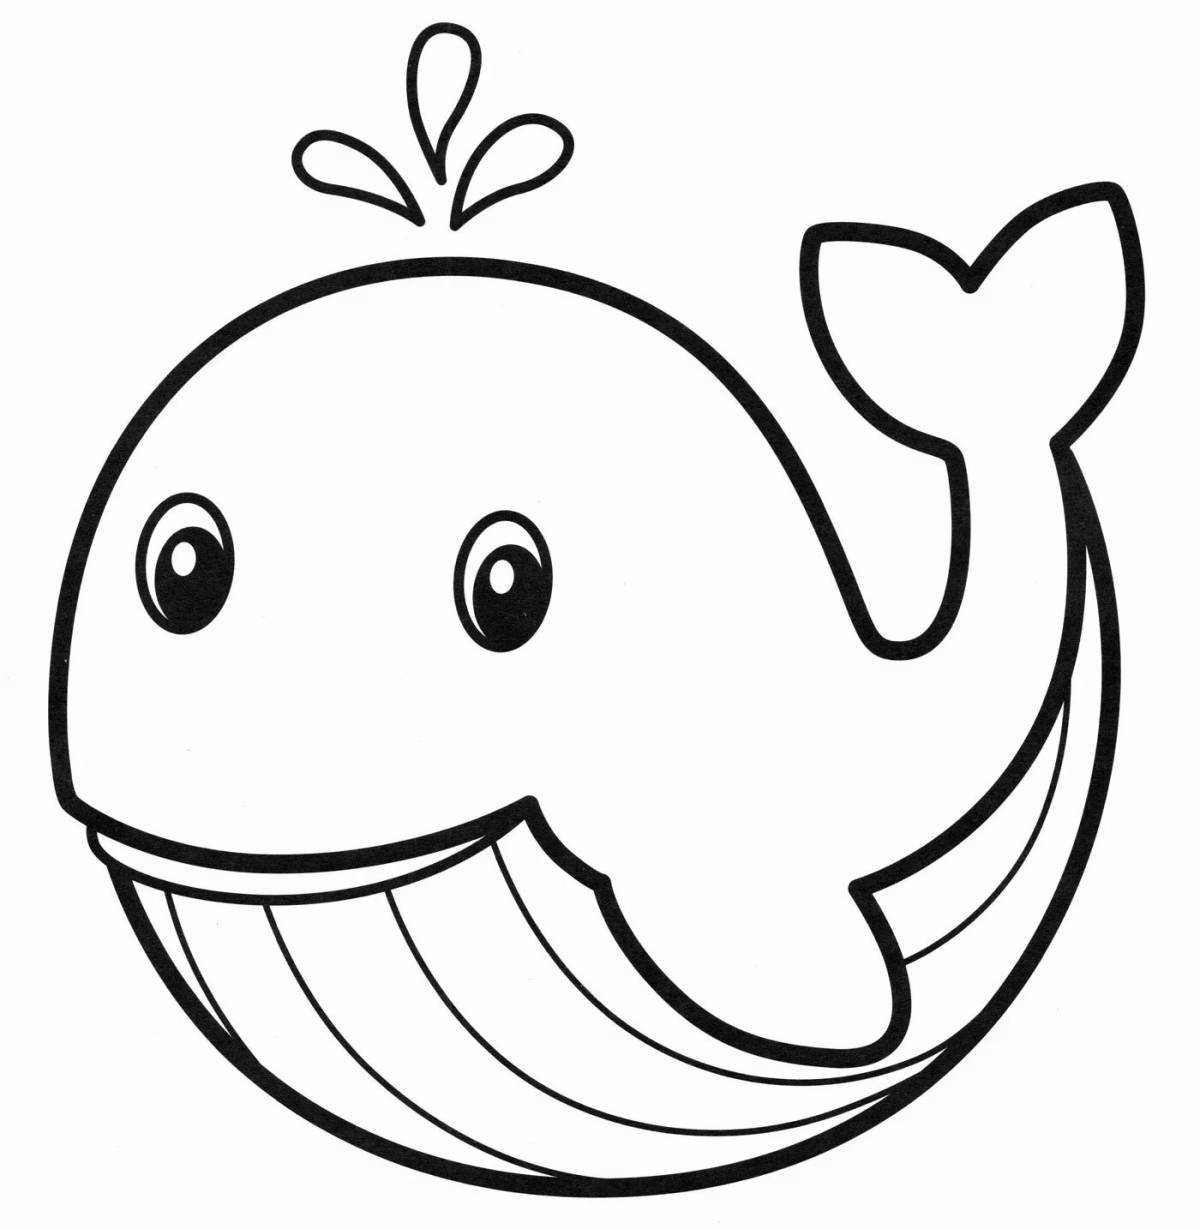 Colorful whale coloring page for 3-4 year olds